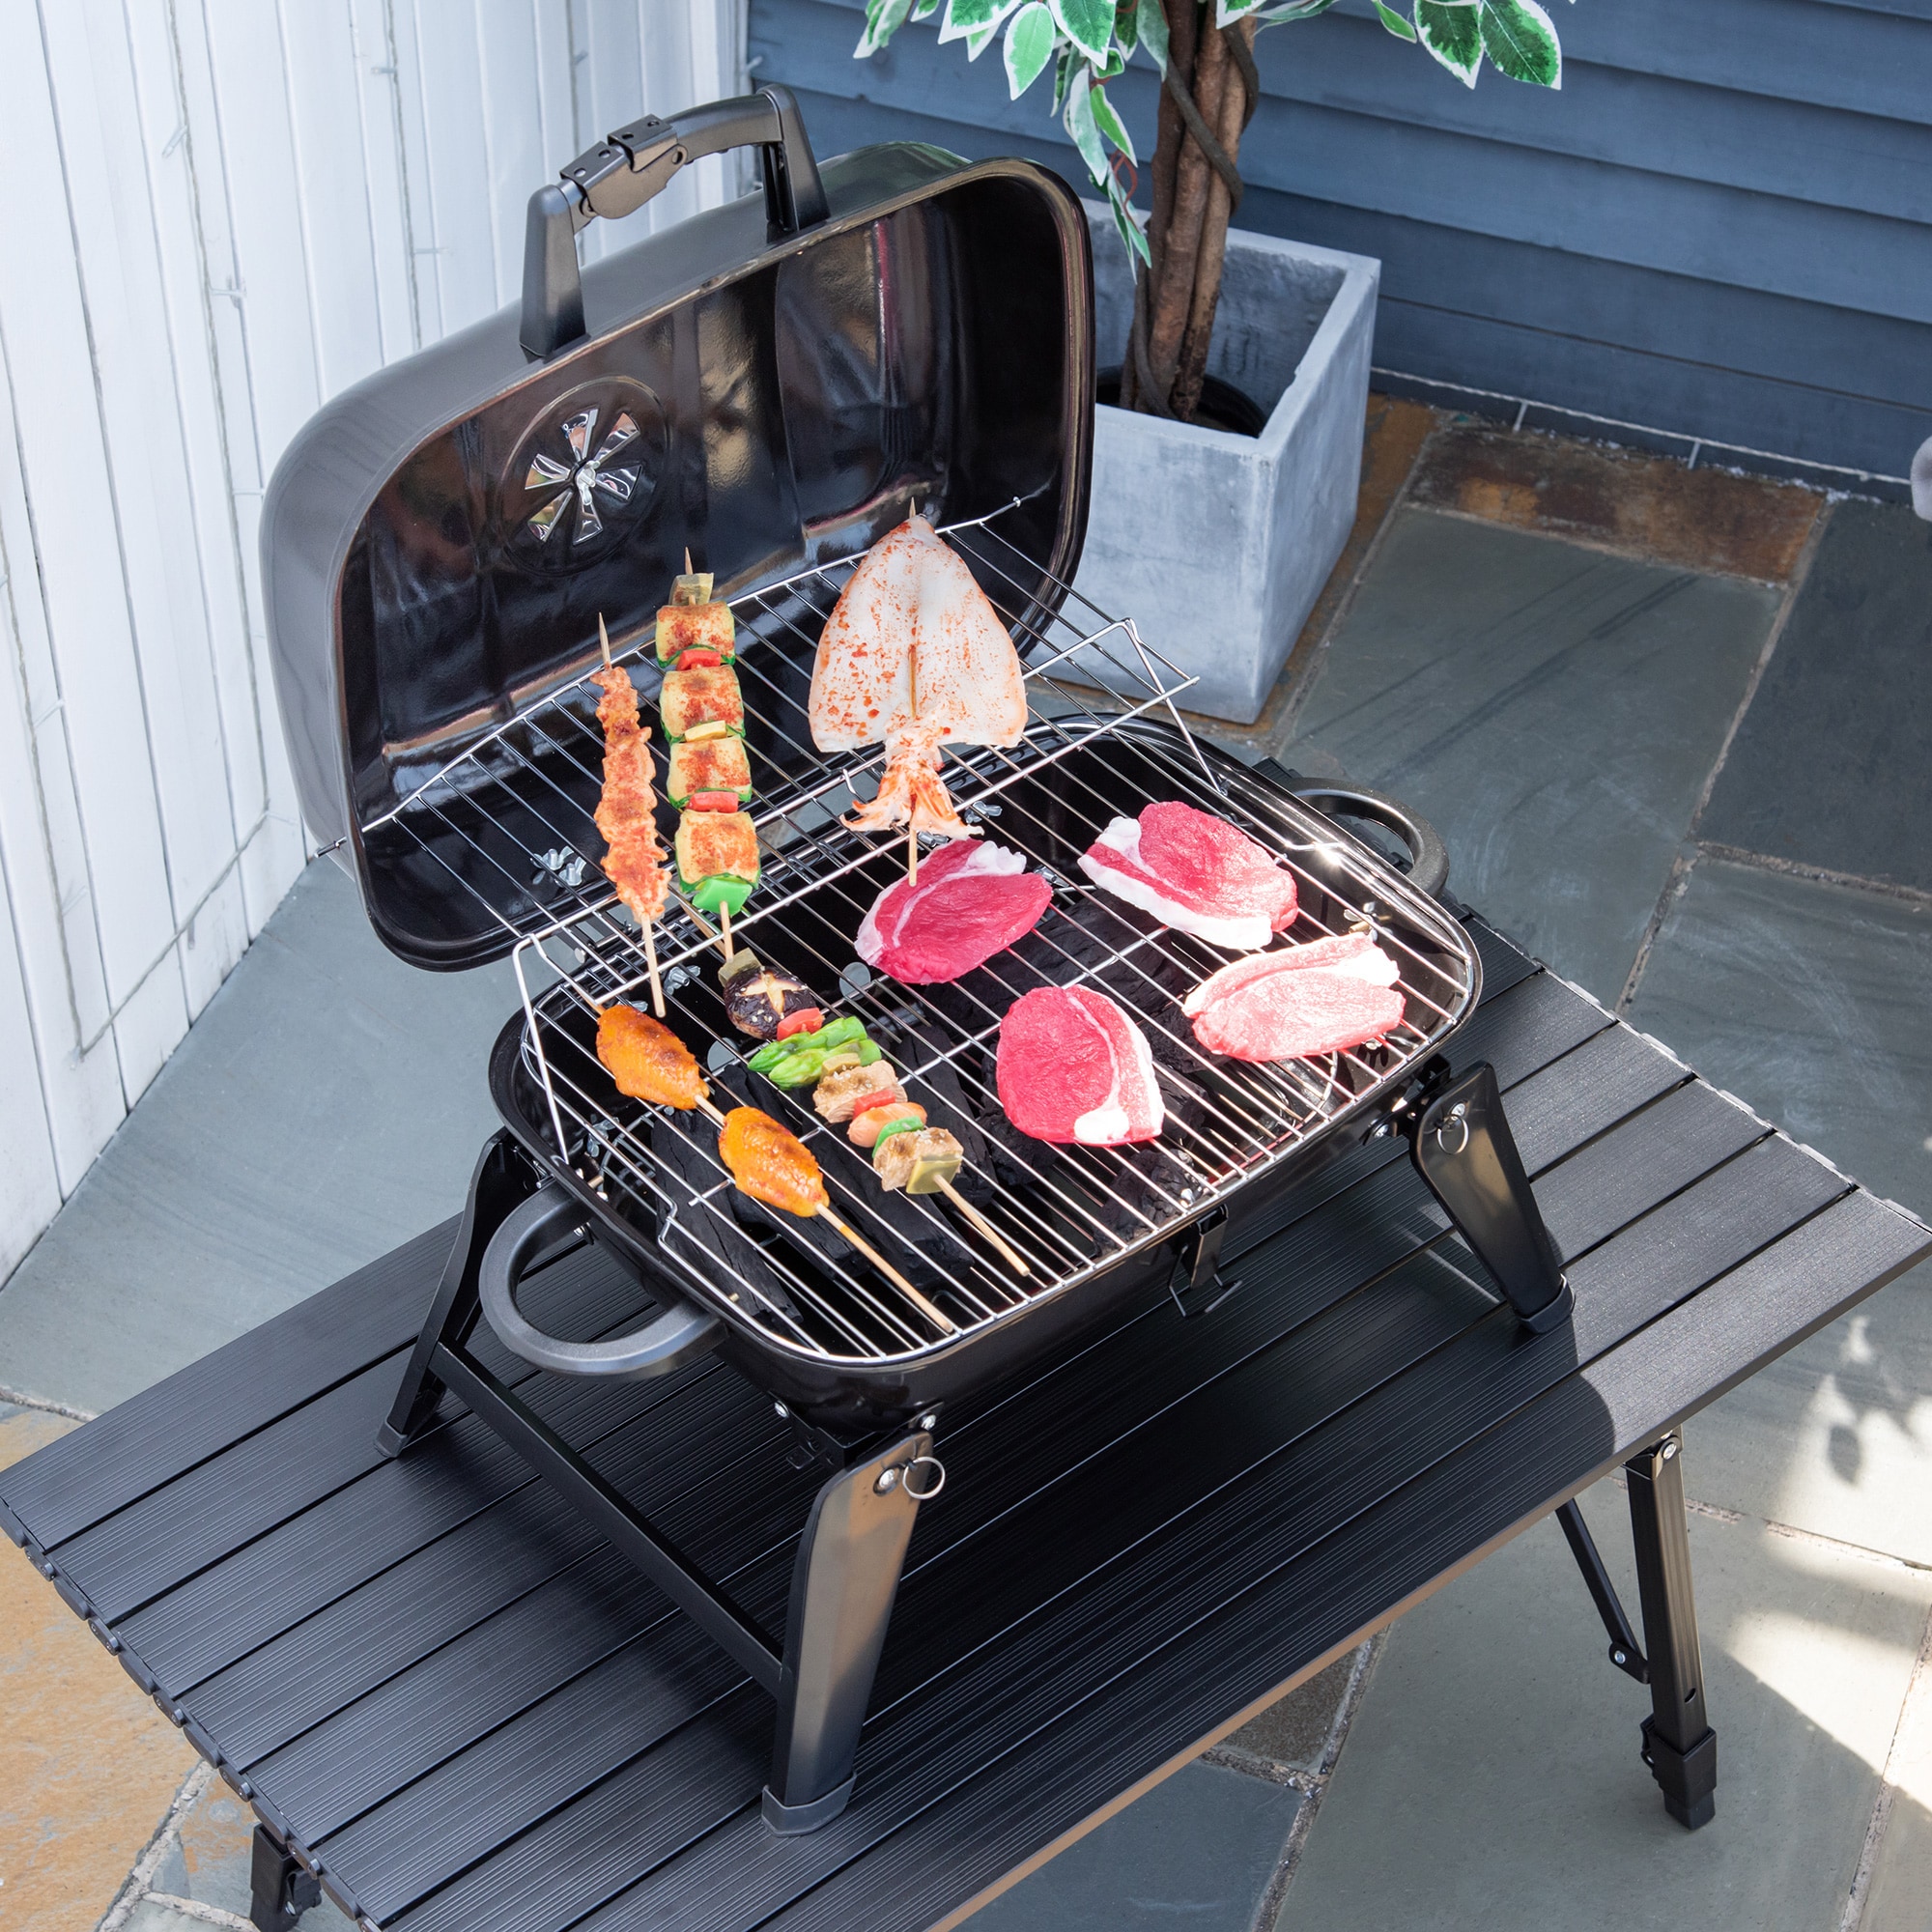  Outsunny Portable Charcoal Grill, Tabletop Outdoor